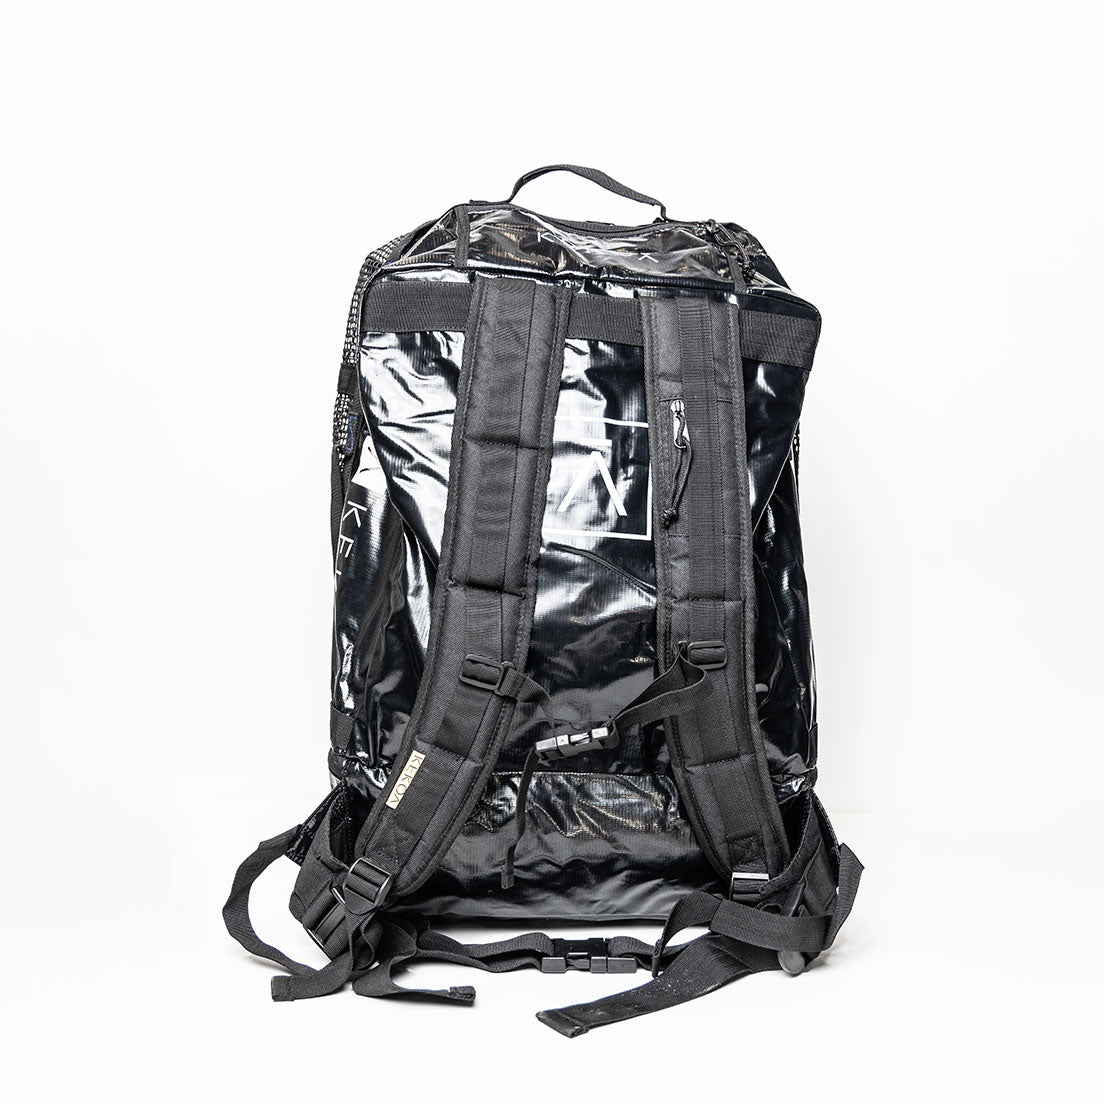 GO-TO BACKPACK